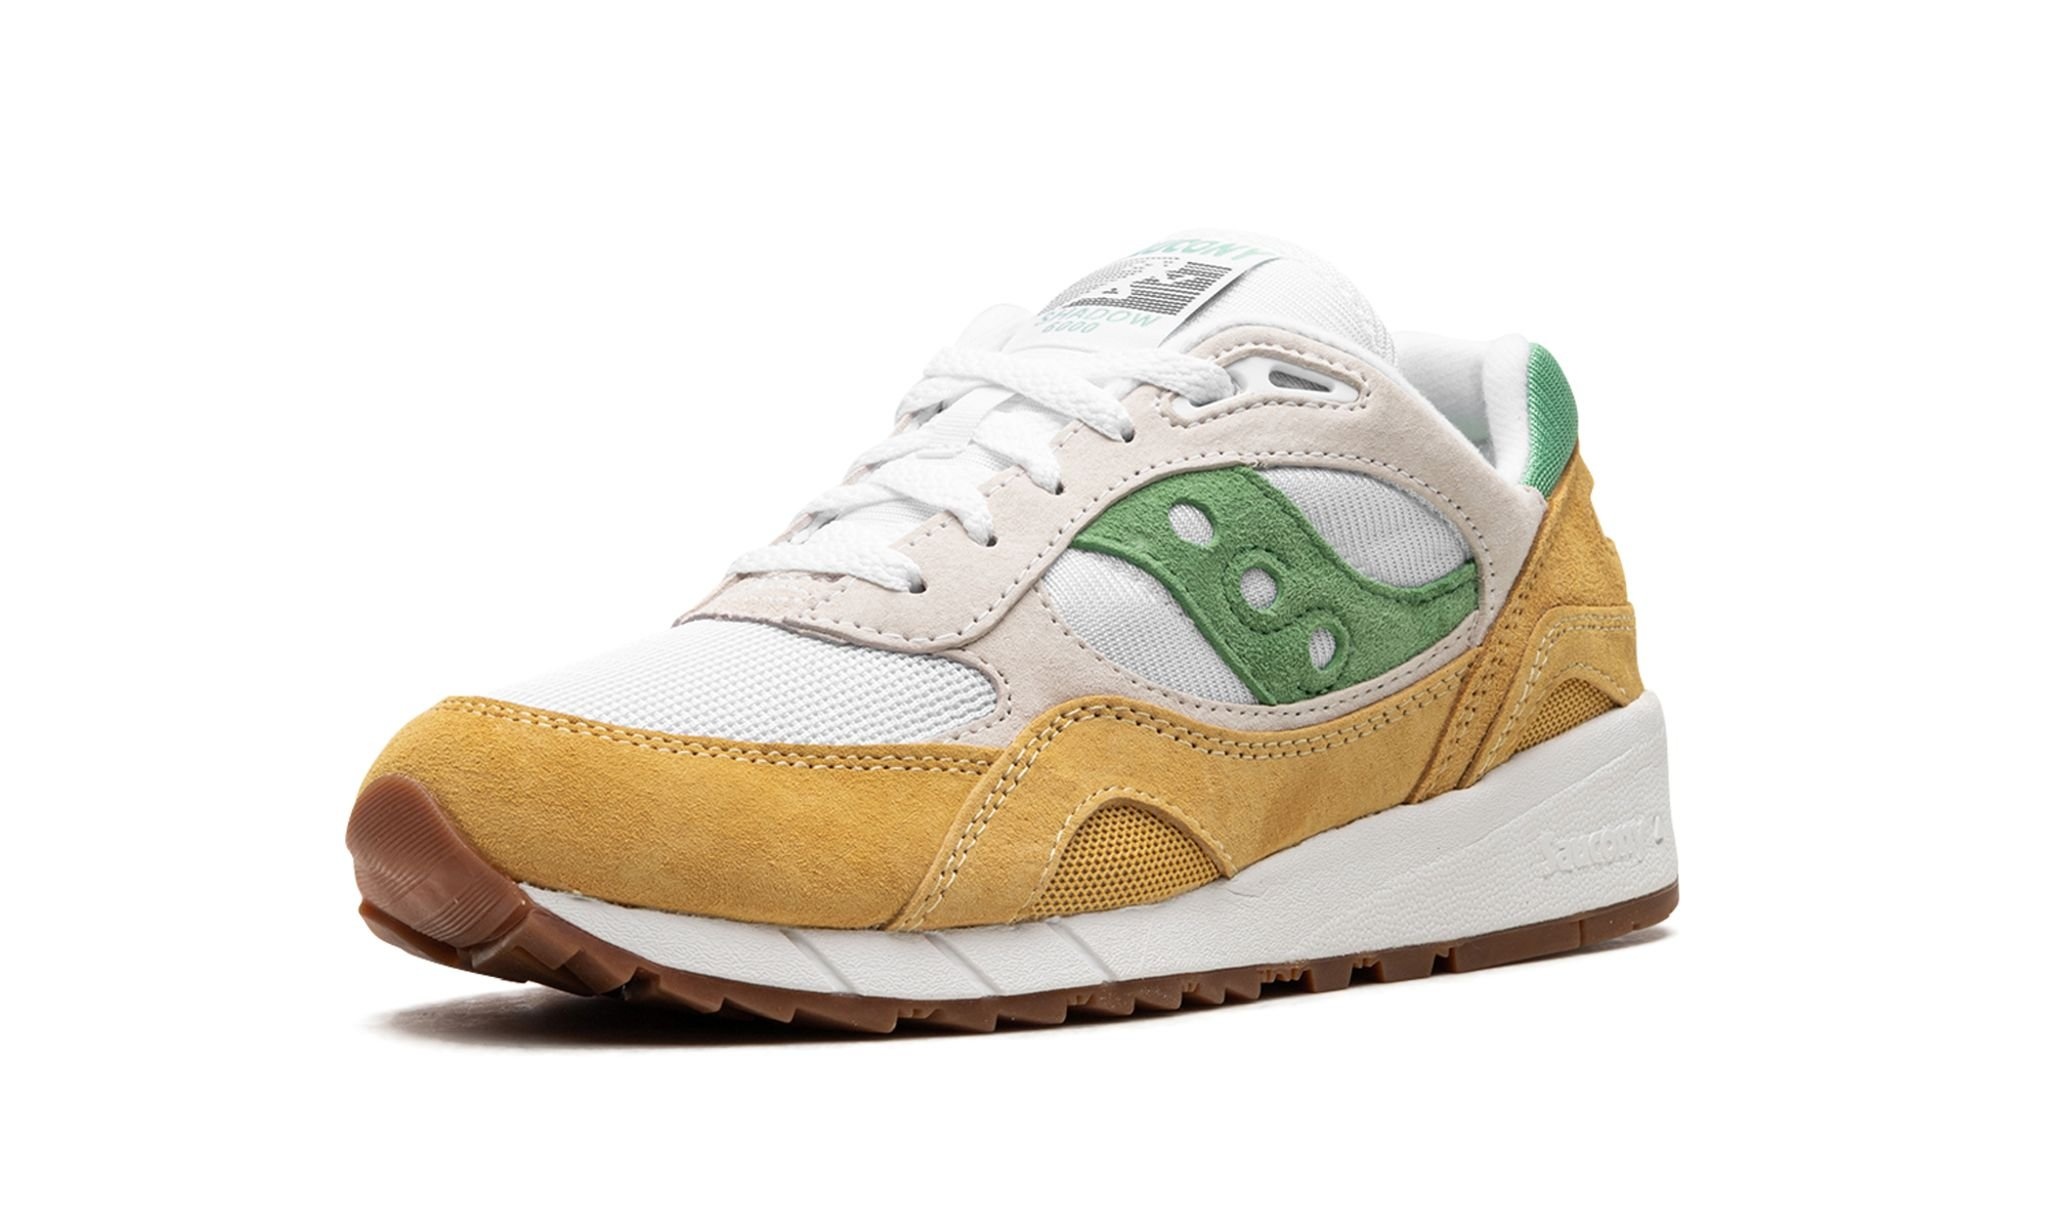 Saucony Shadow 6000 "White/Yellow/Green" - 4